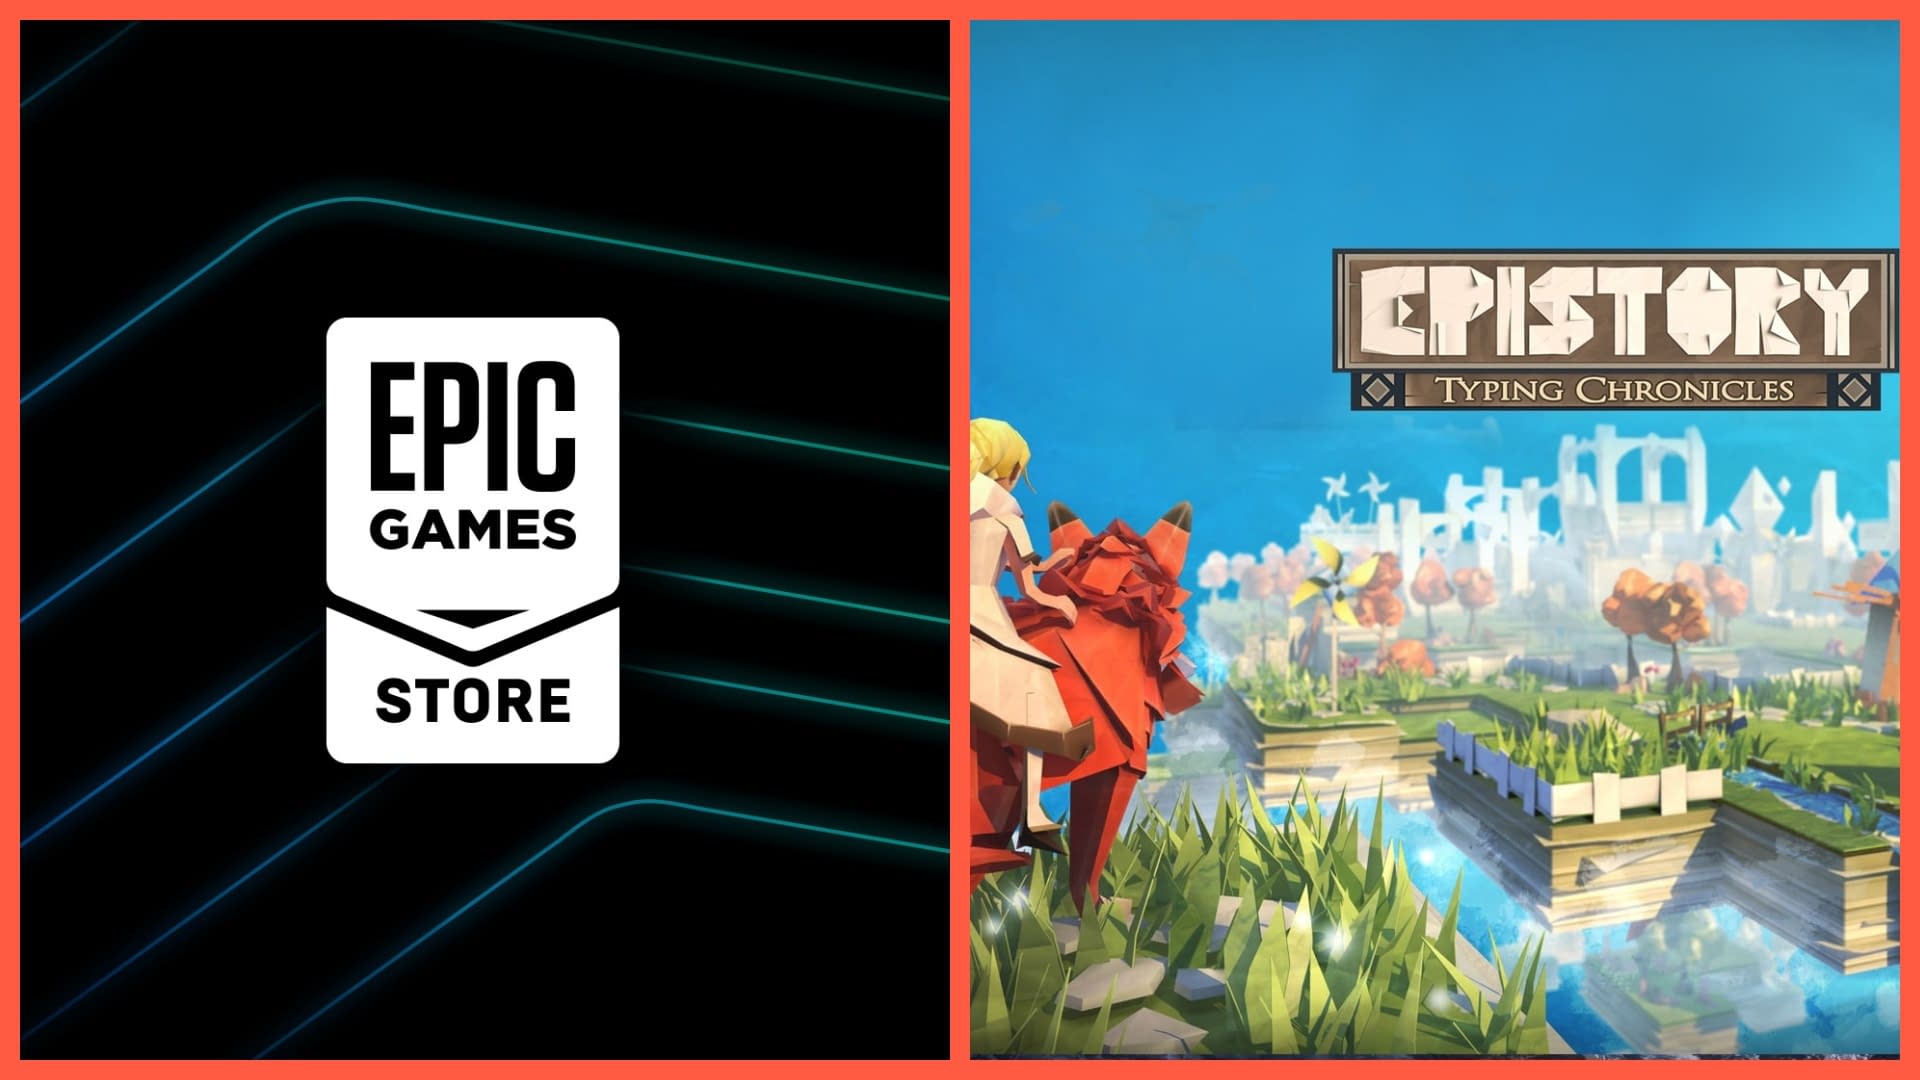 Epic Games This Week Gives A Game Free: Epistory – Typing Chronicles